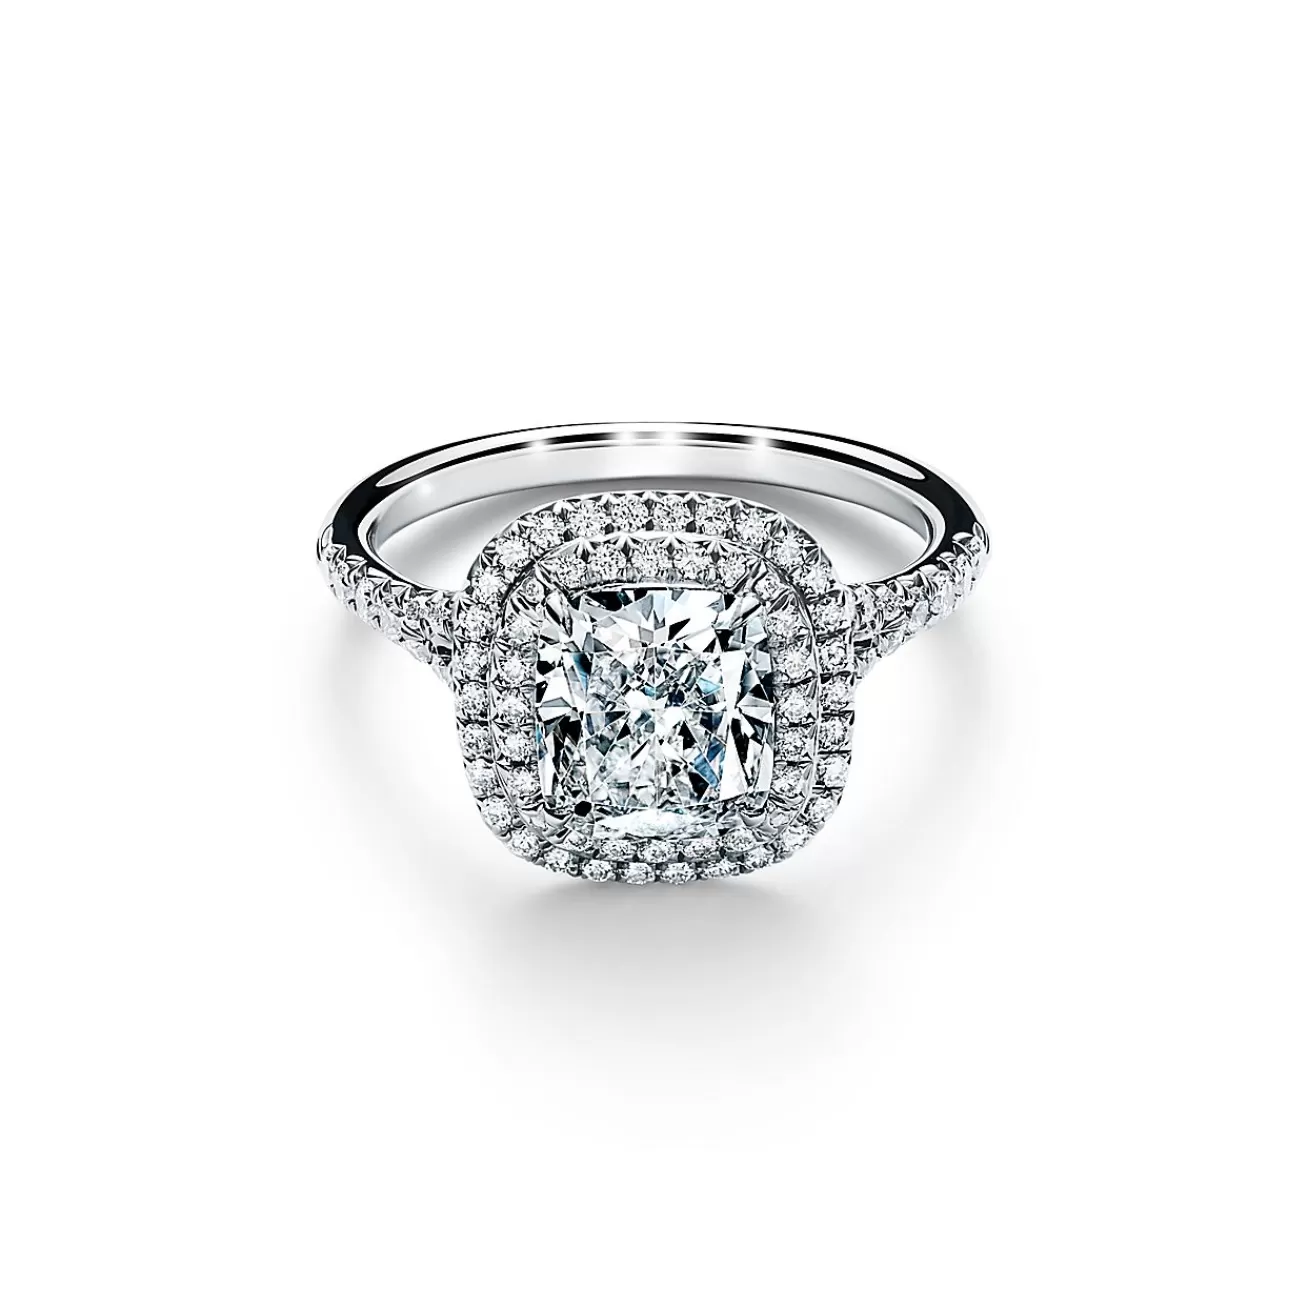 Tiffany & Co. Tiffany Soleste® cushion-cut engagement ring with a diamond band in platinum. | ^ Engagement Rings